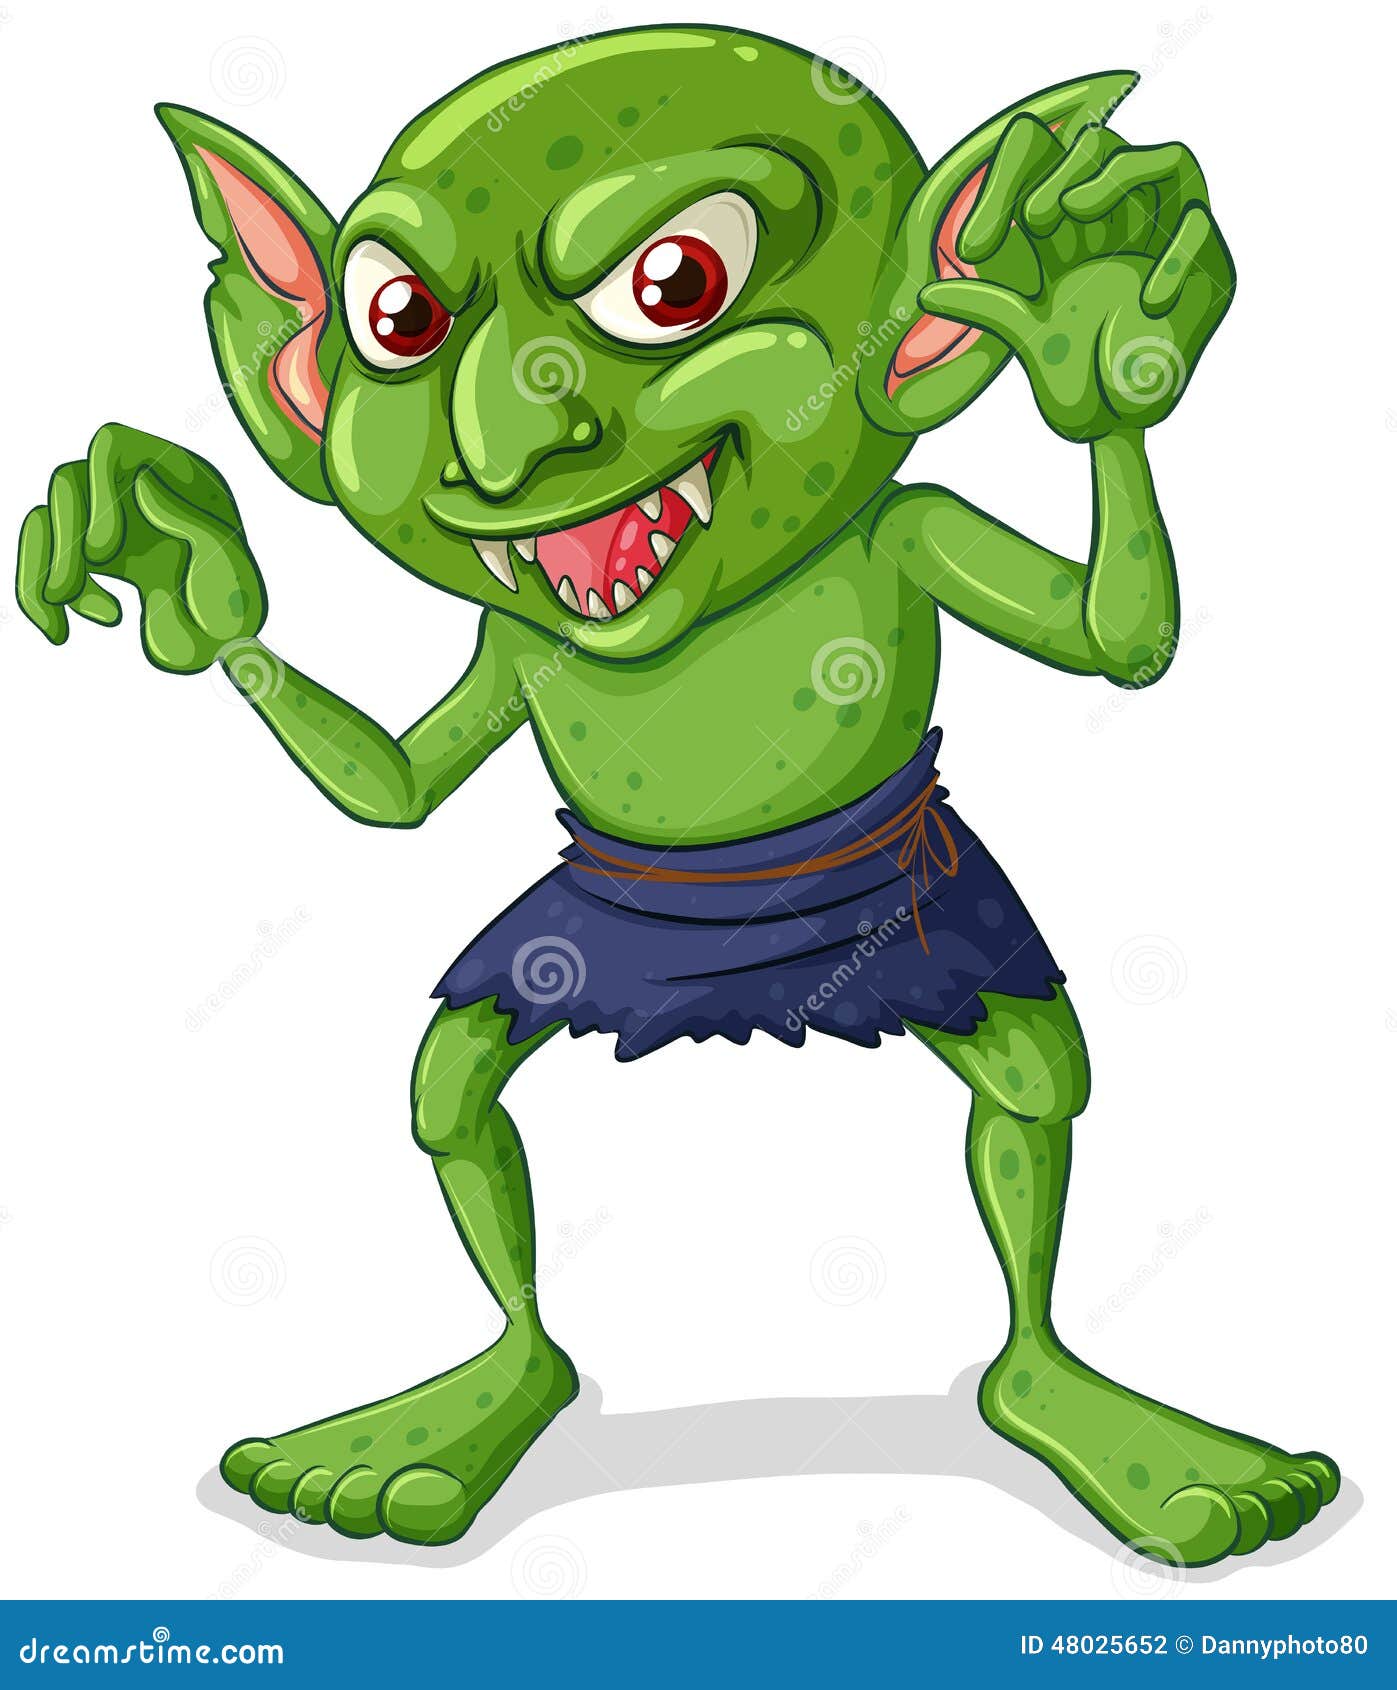 Goblin Cartoons, Illustrations & Vector Stock Images - 12580 Pictures